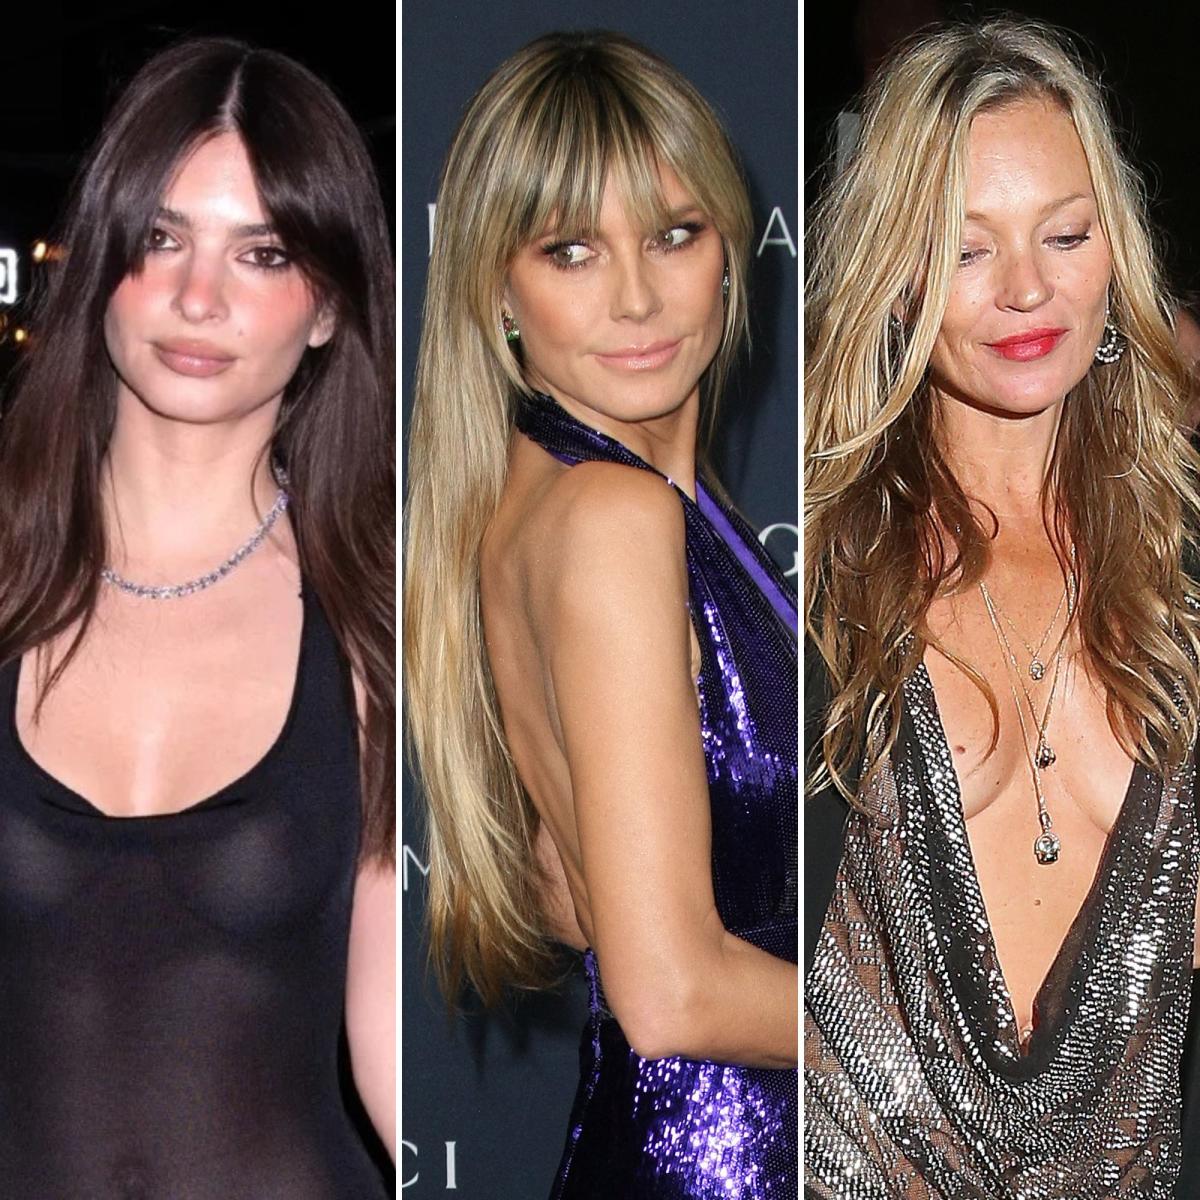 Best Celebrity Nip slips On Stage - Hot Actress Photos and Actress Hot News  in 2024